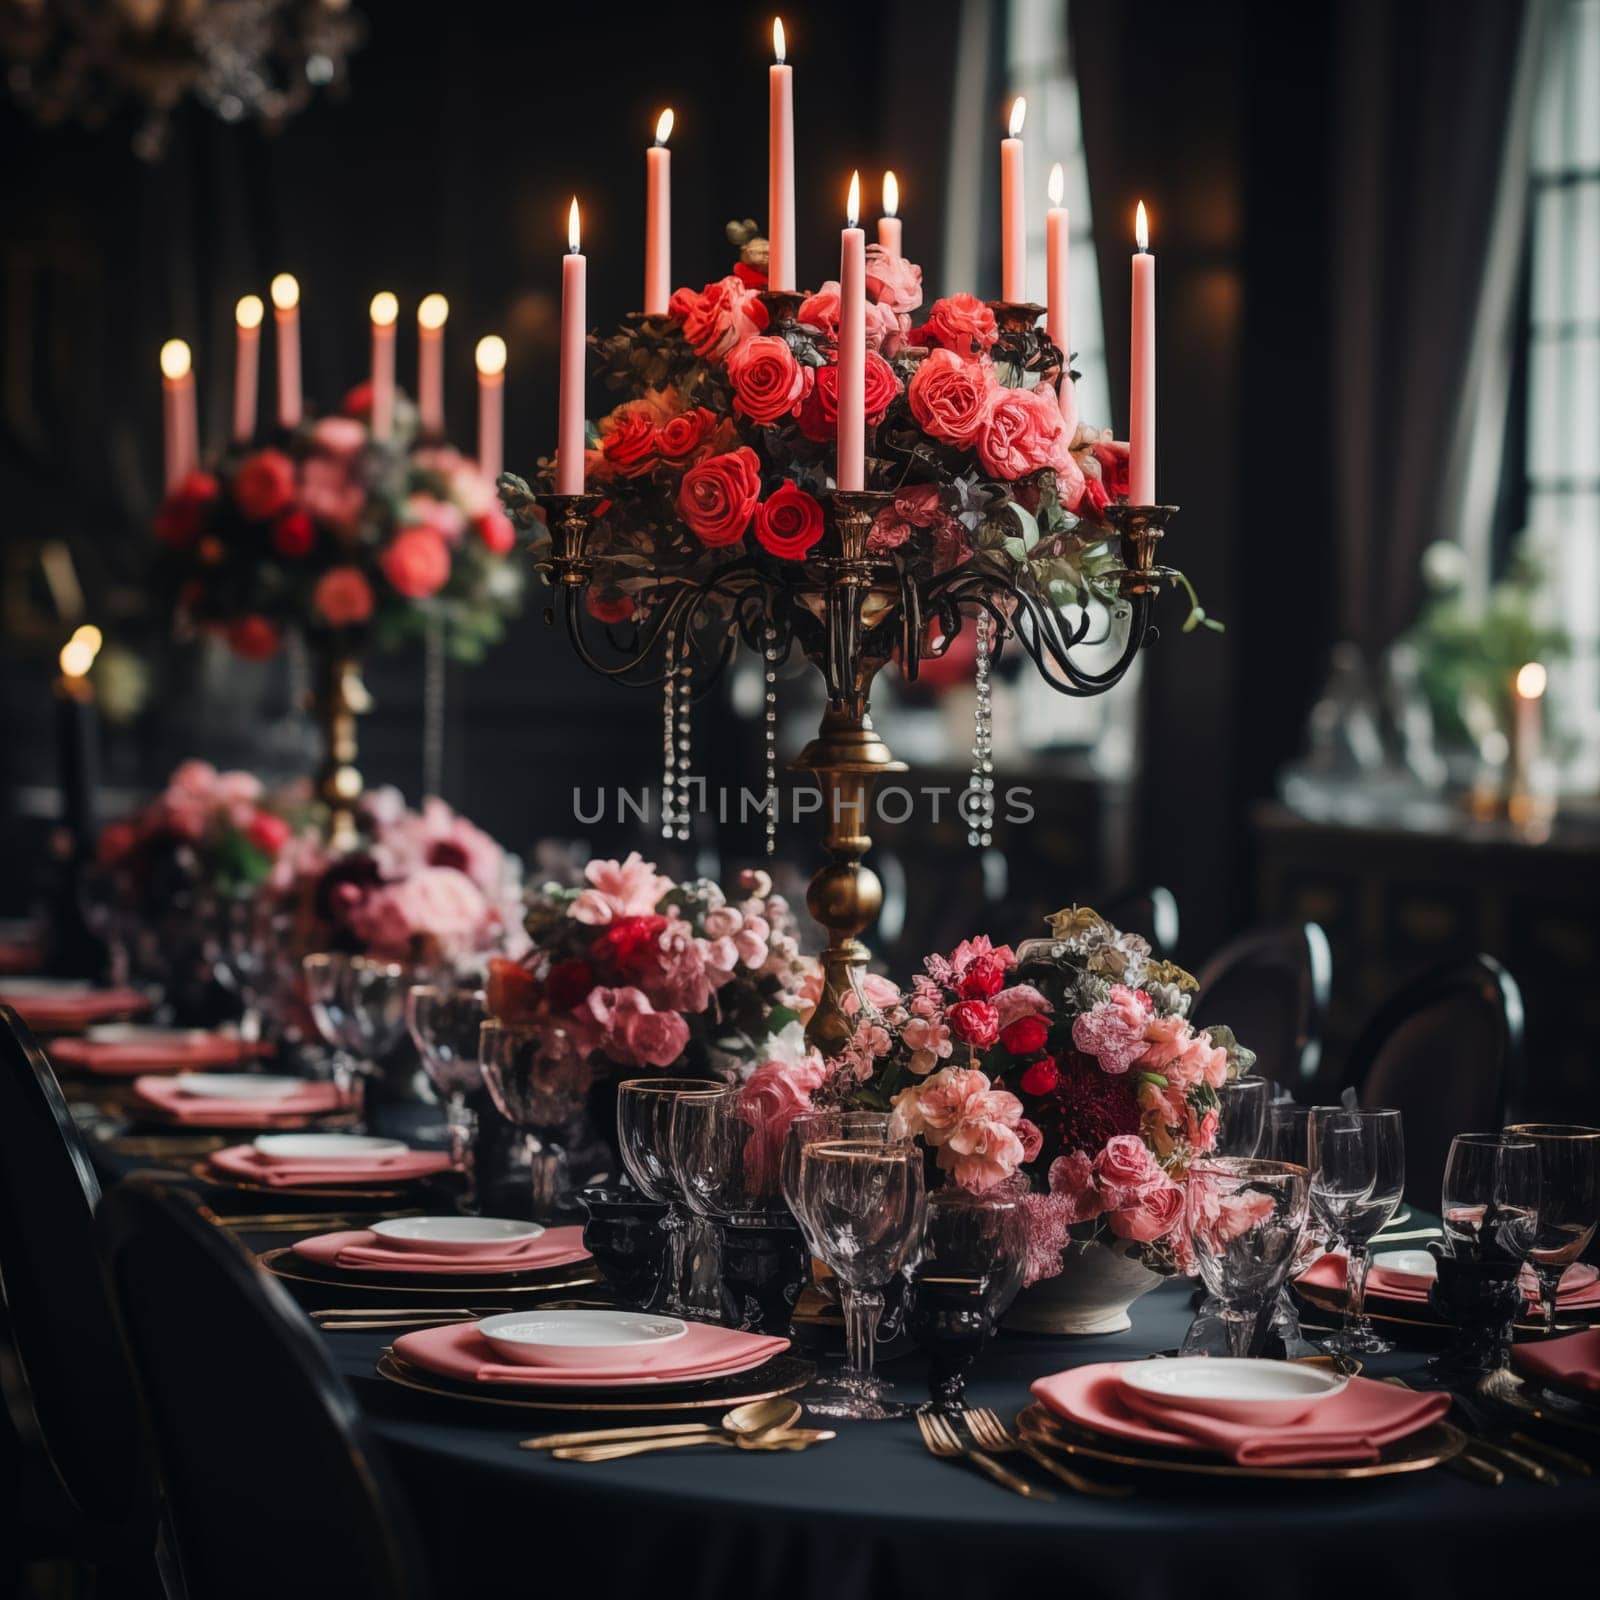 A beautifully arranged table at a luxury wedding reception, adorned with a variety of flowers and glowing candles, creating a romantic and trendy decor. The large chandelier in the background adds to the chic ambiance.